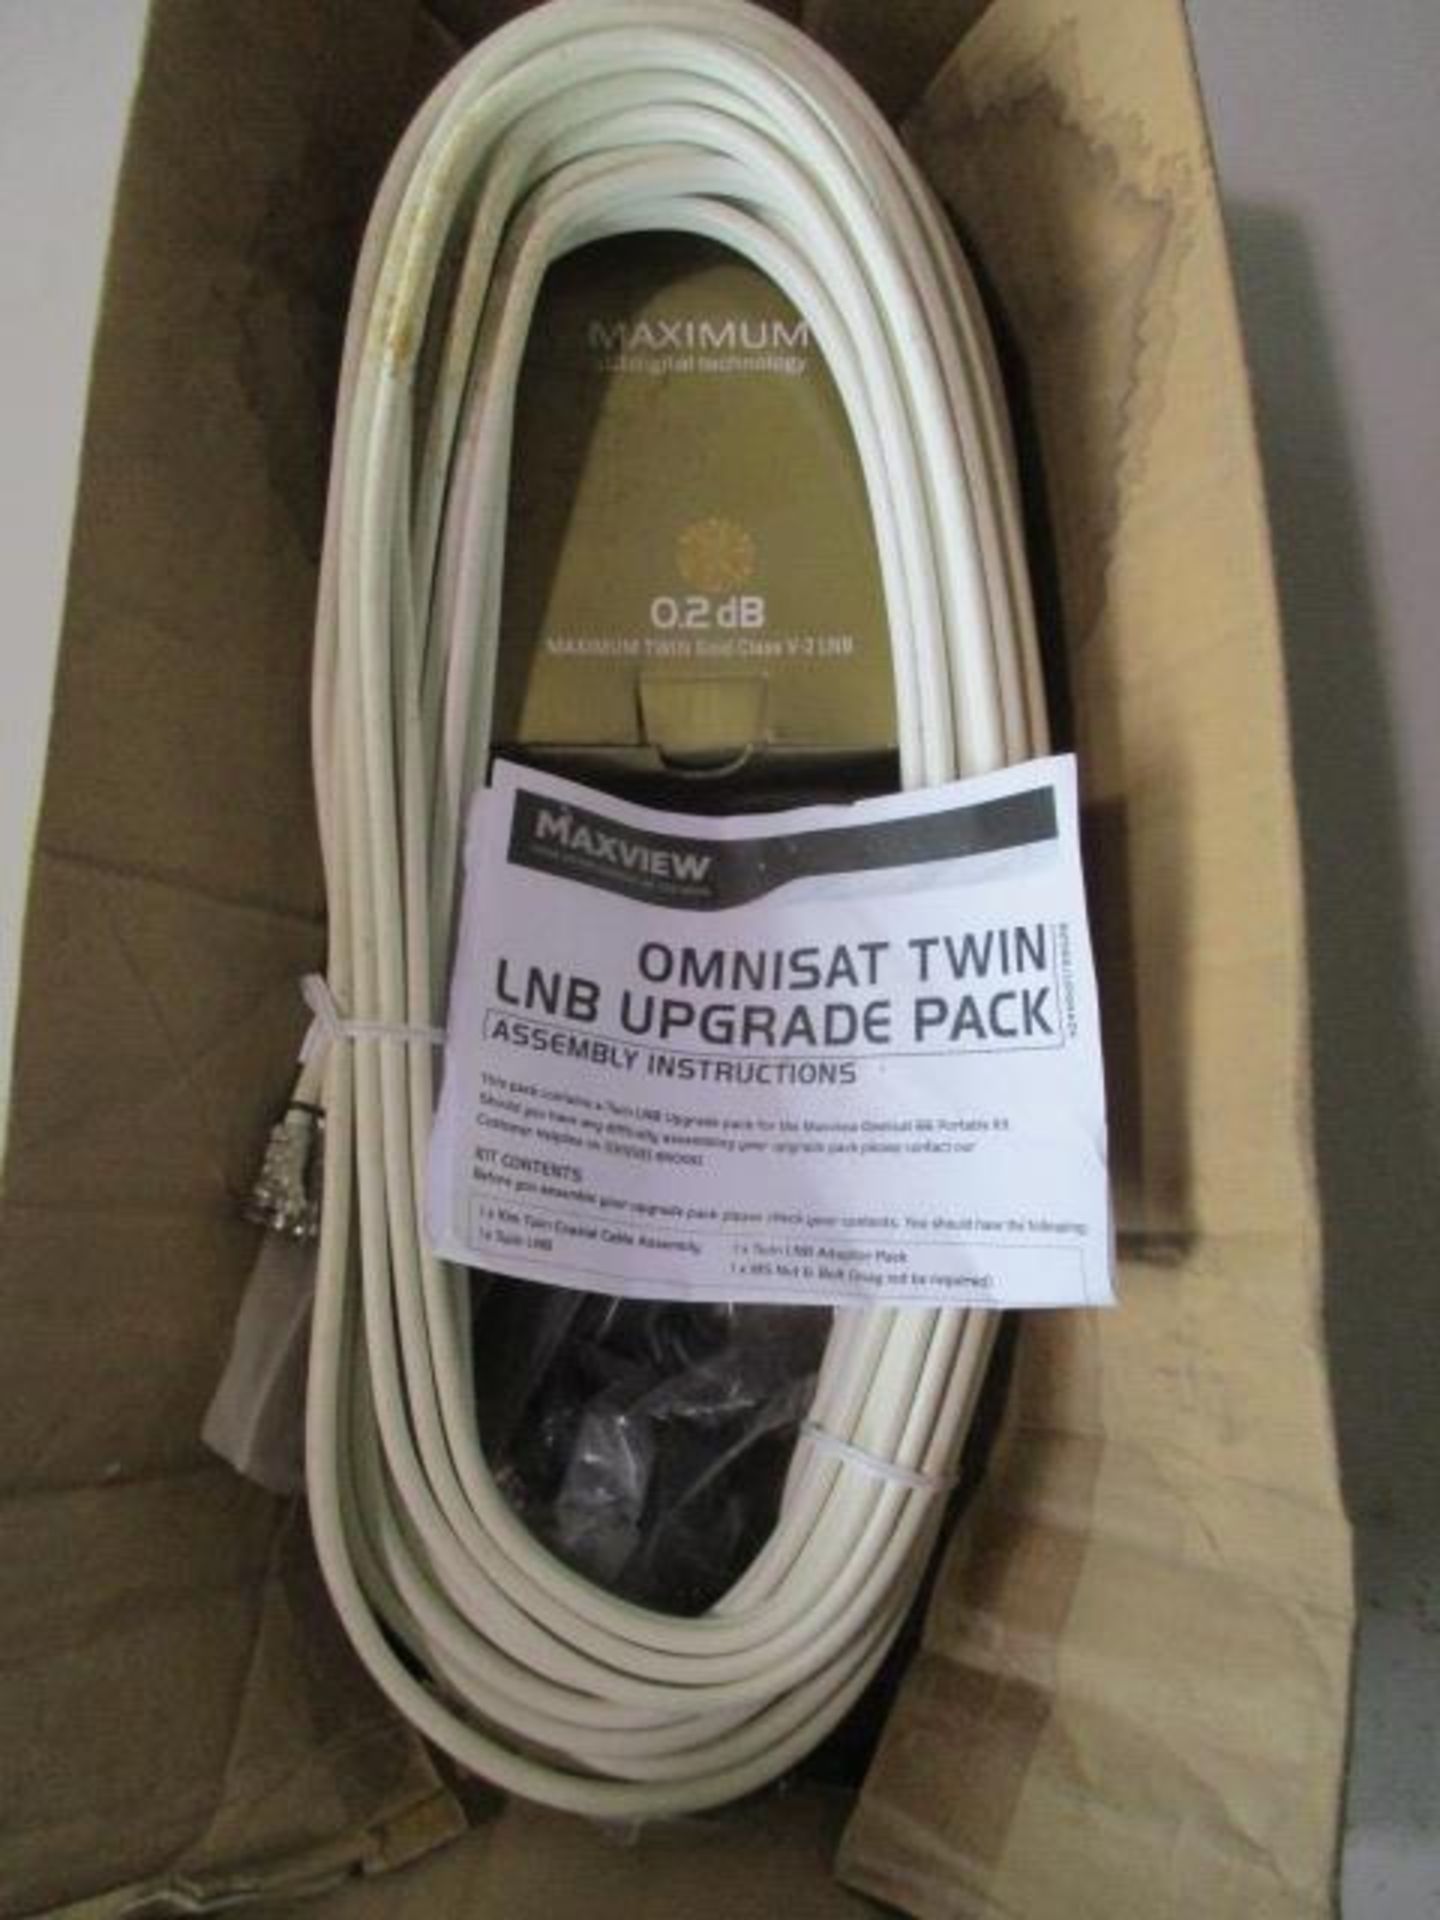 Omni Sat twin LNB Upgrade pack by Max View with accessories as pictured - Image 2 of 3